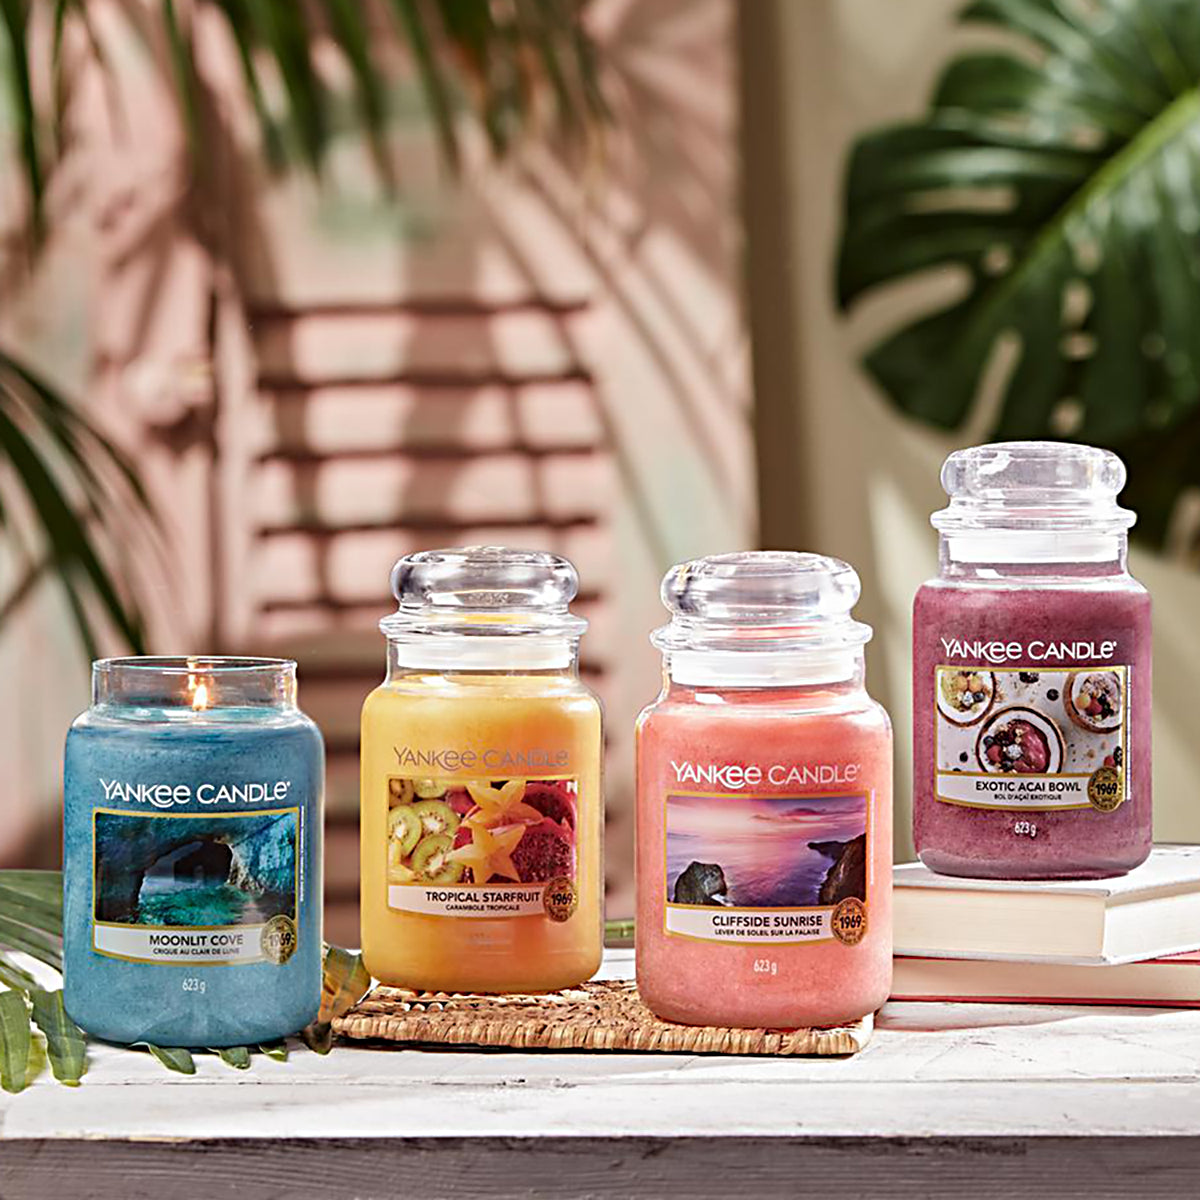 TROPICAL STARFRUIT -Yankee Candle- Giara Piccola – Candle With Care